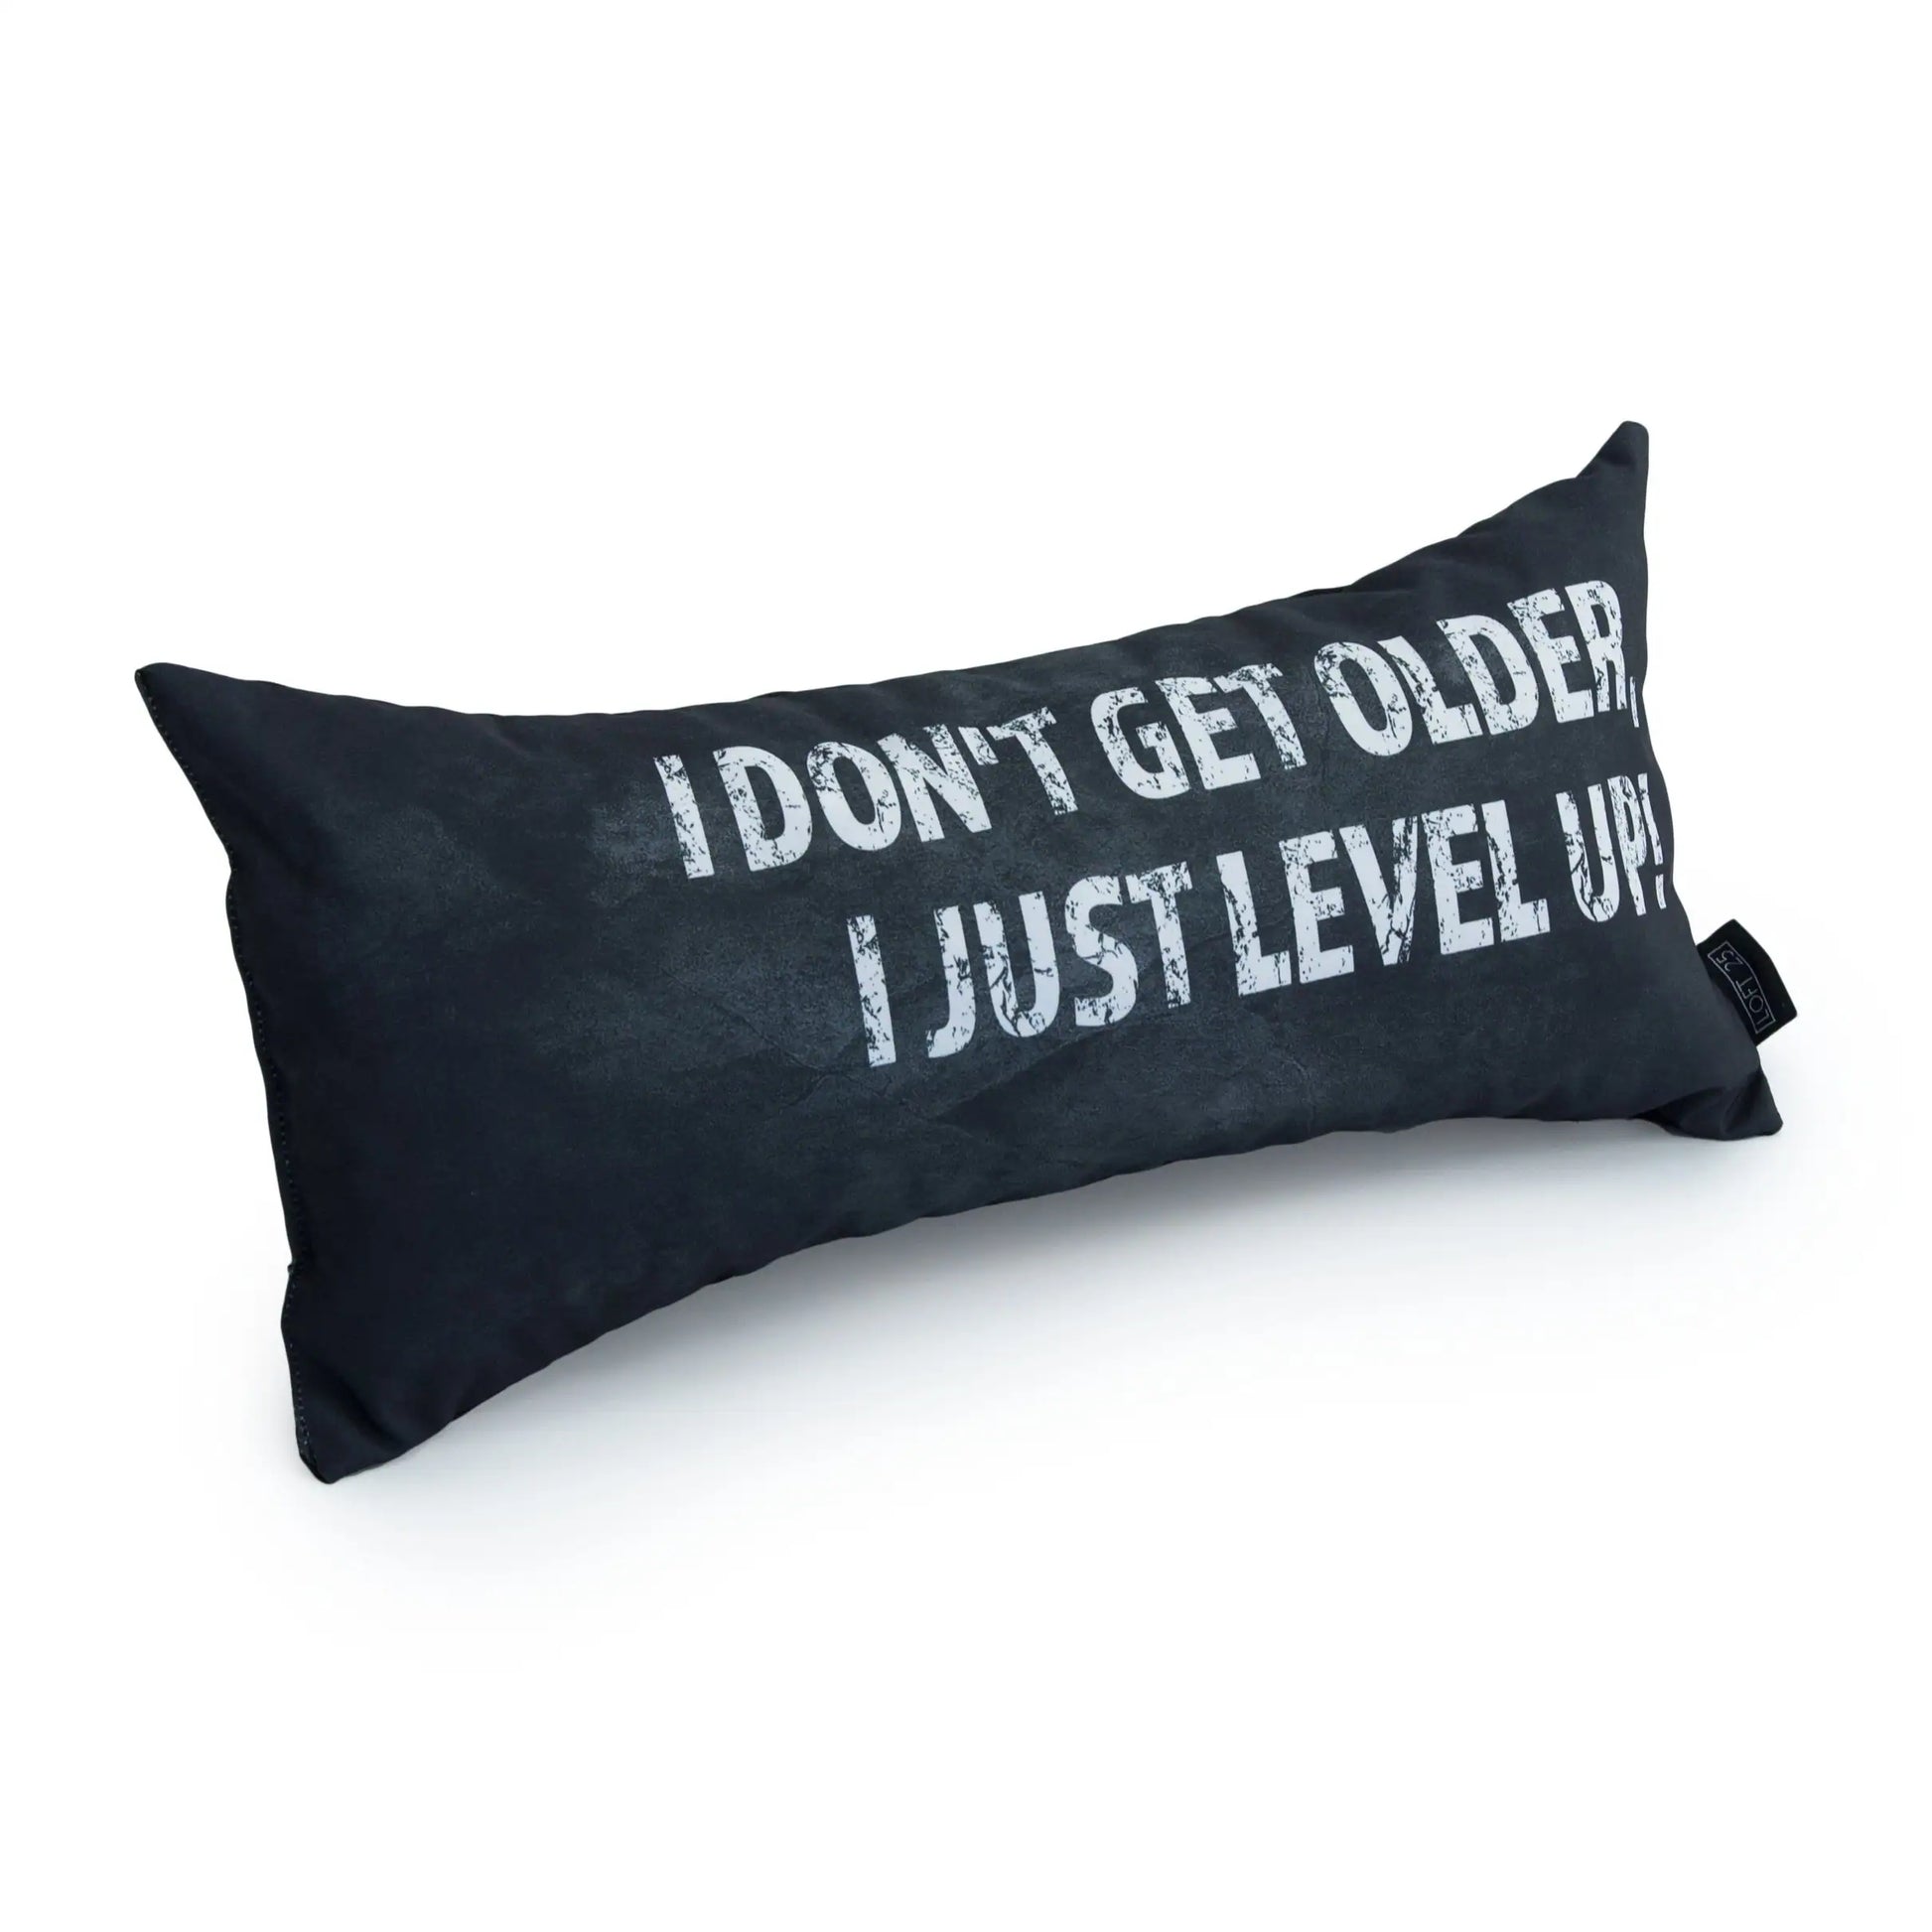 A grey rectangular pillow with the text "I don't get older, I just level up."